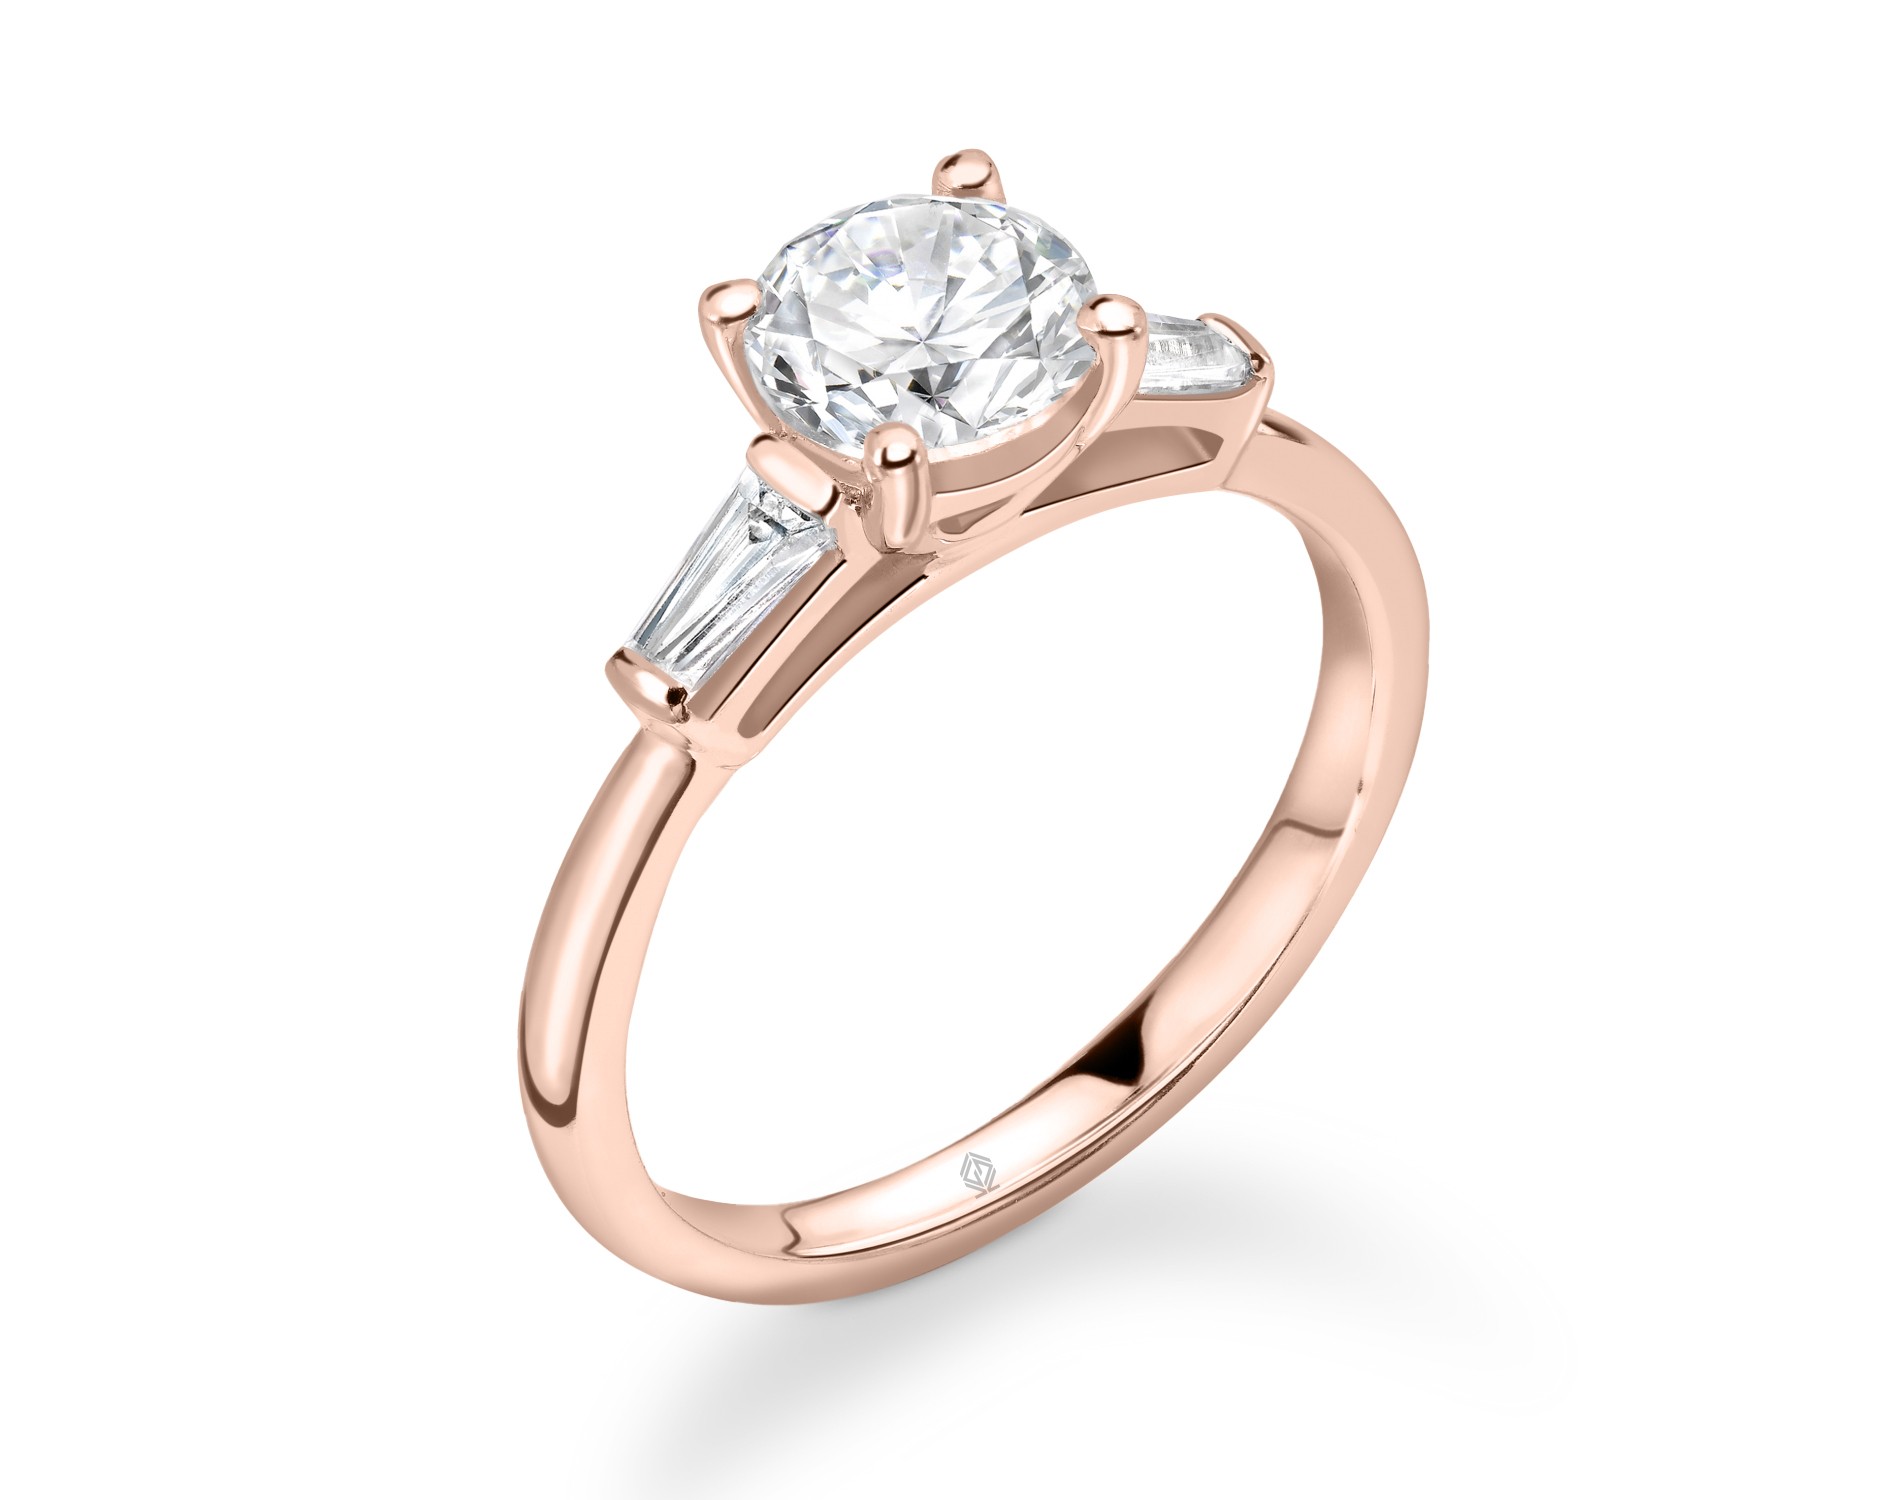 18K ROSE GOLD ROUND CUT DIAMOND RING WITH BAGUETTES CUT SIDE STONES